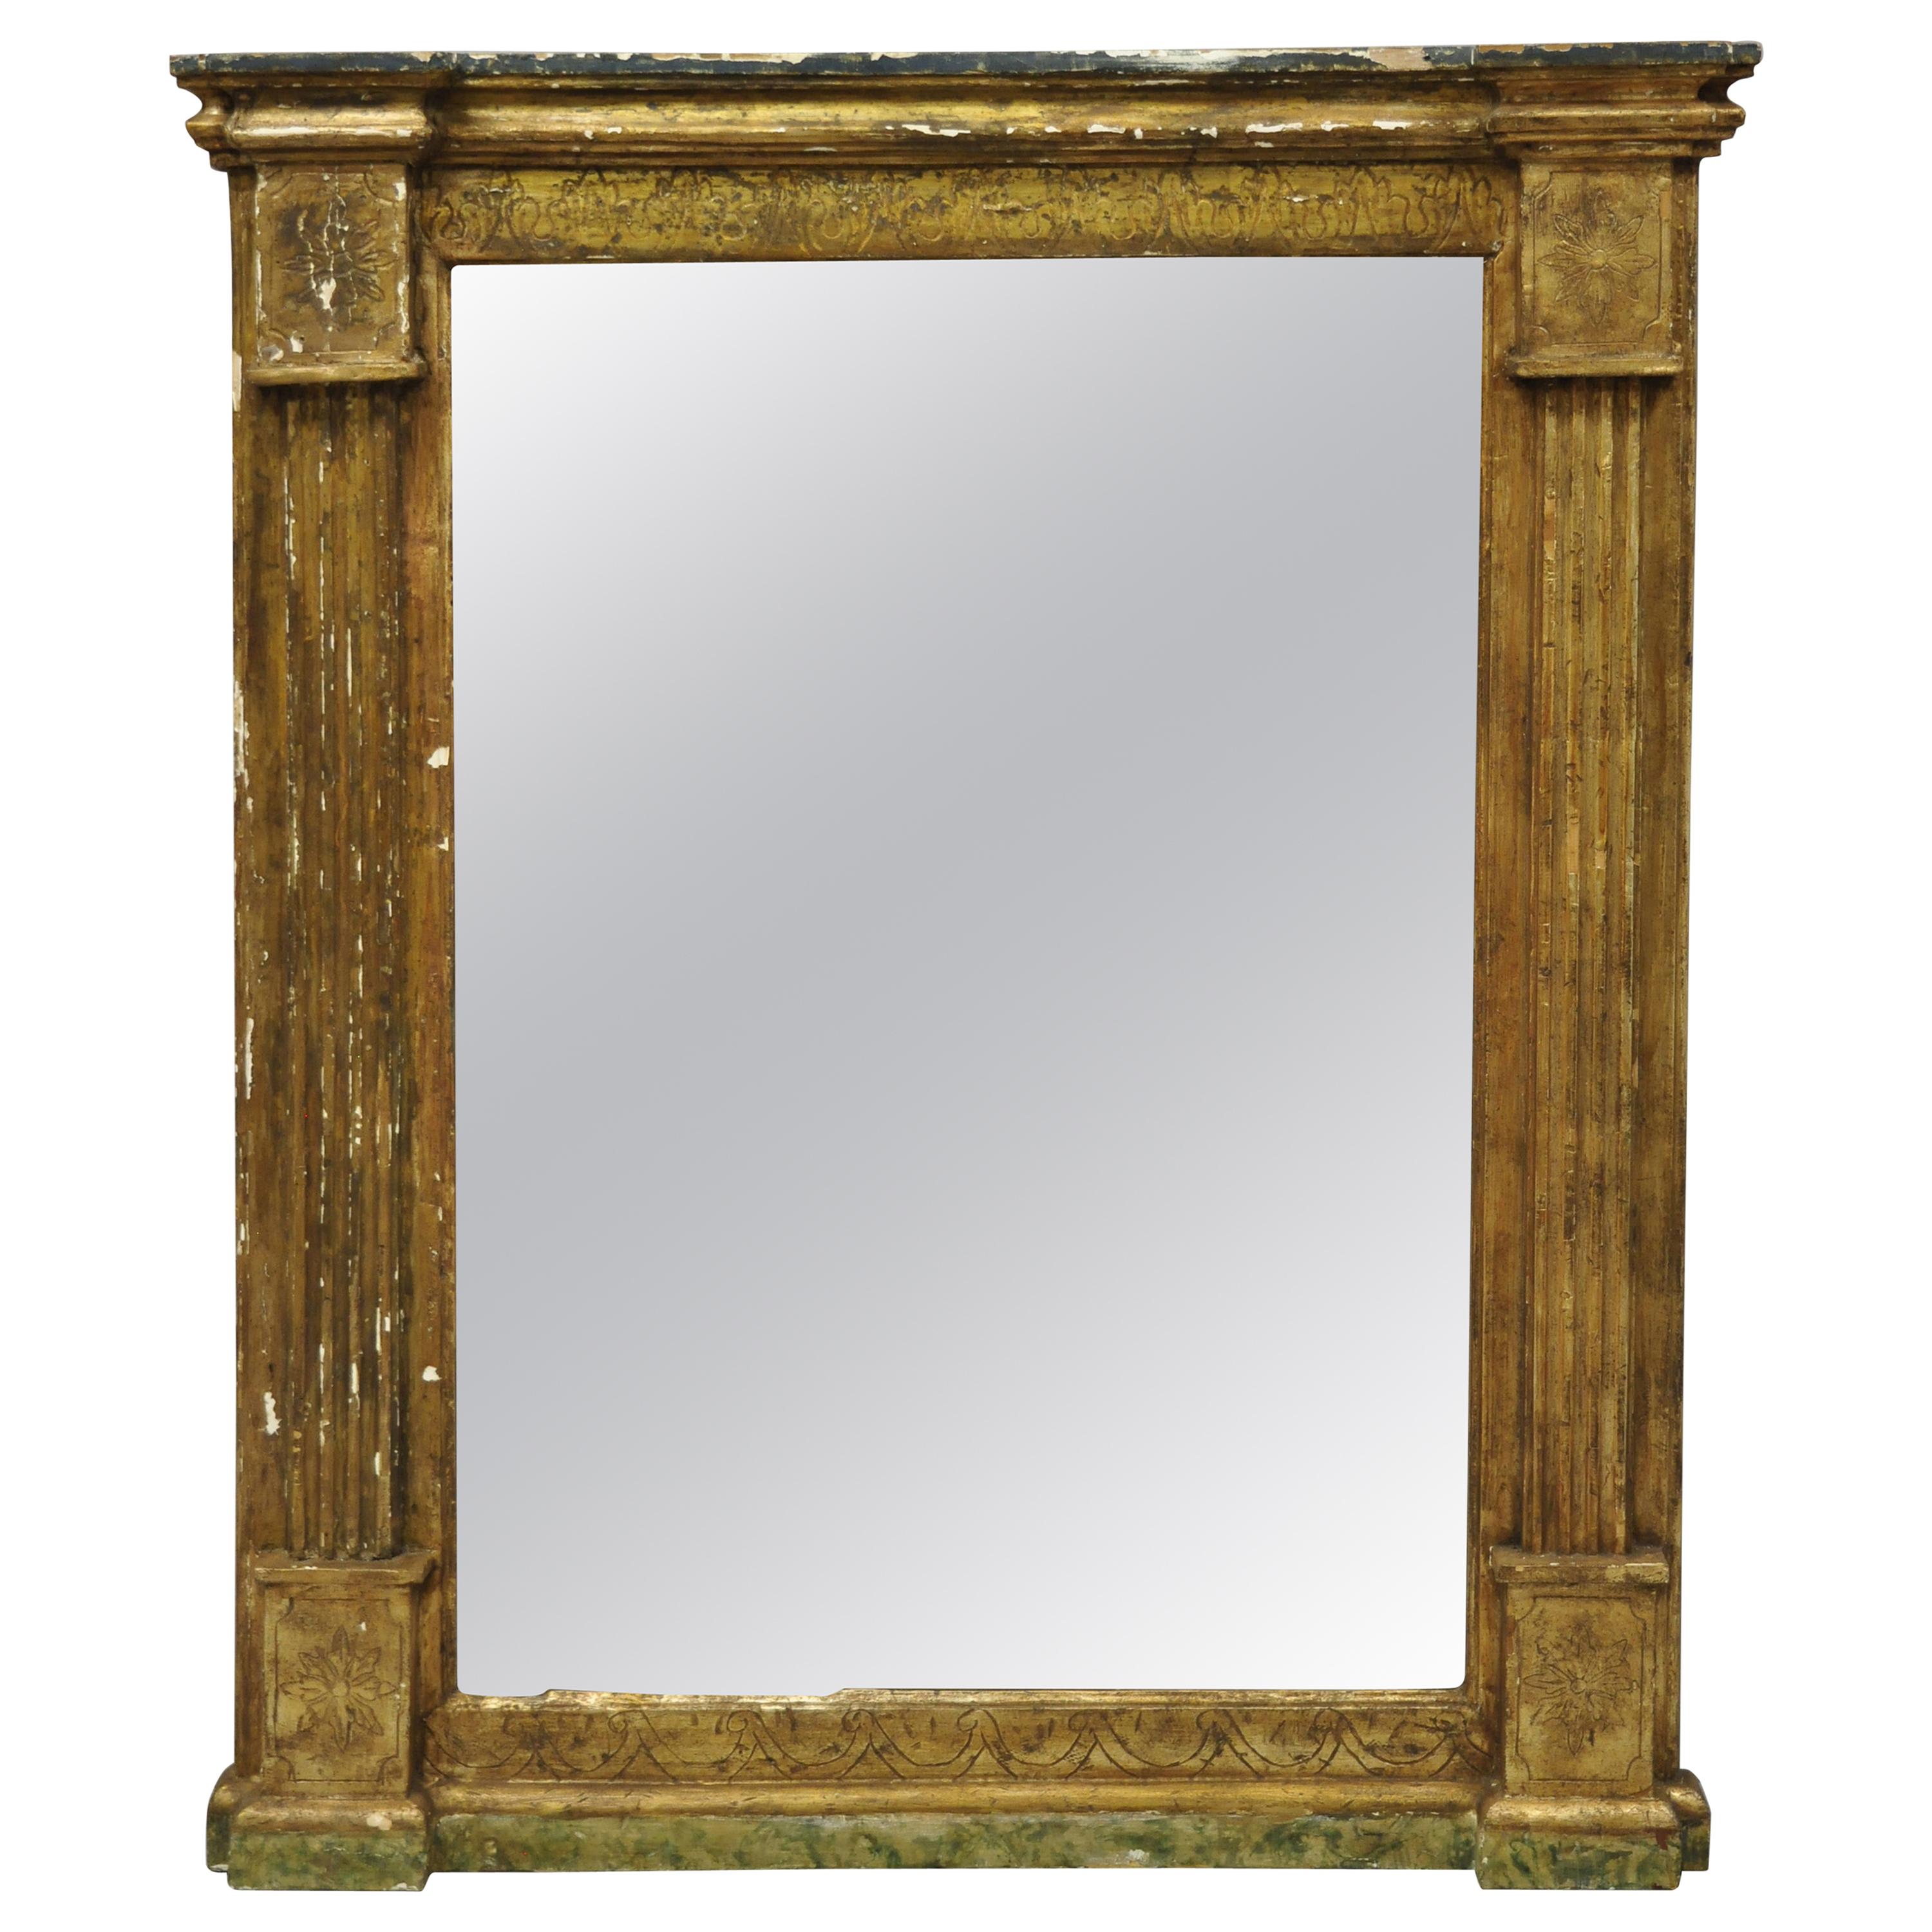 Italian Classical Florentine Giltwood Distressed Gold Looking Glass Wall Mirror For Sale